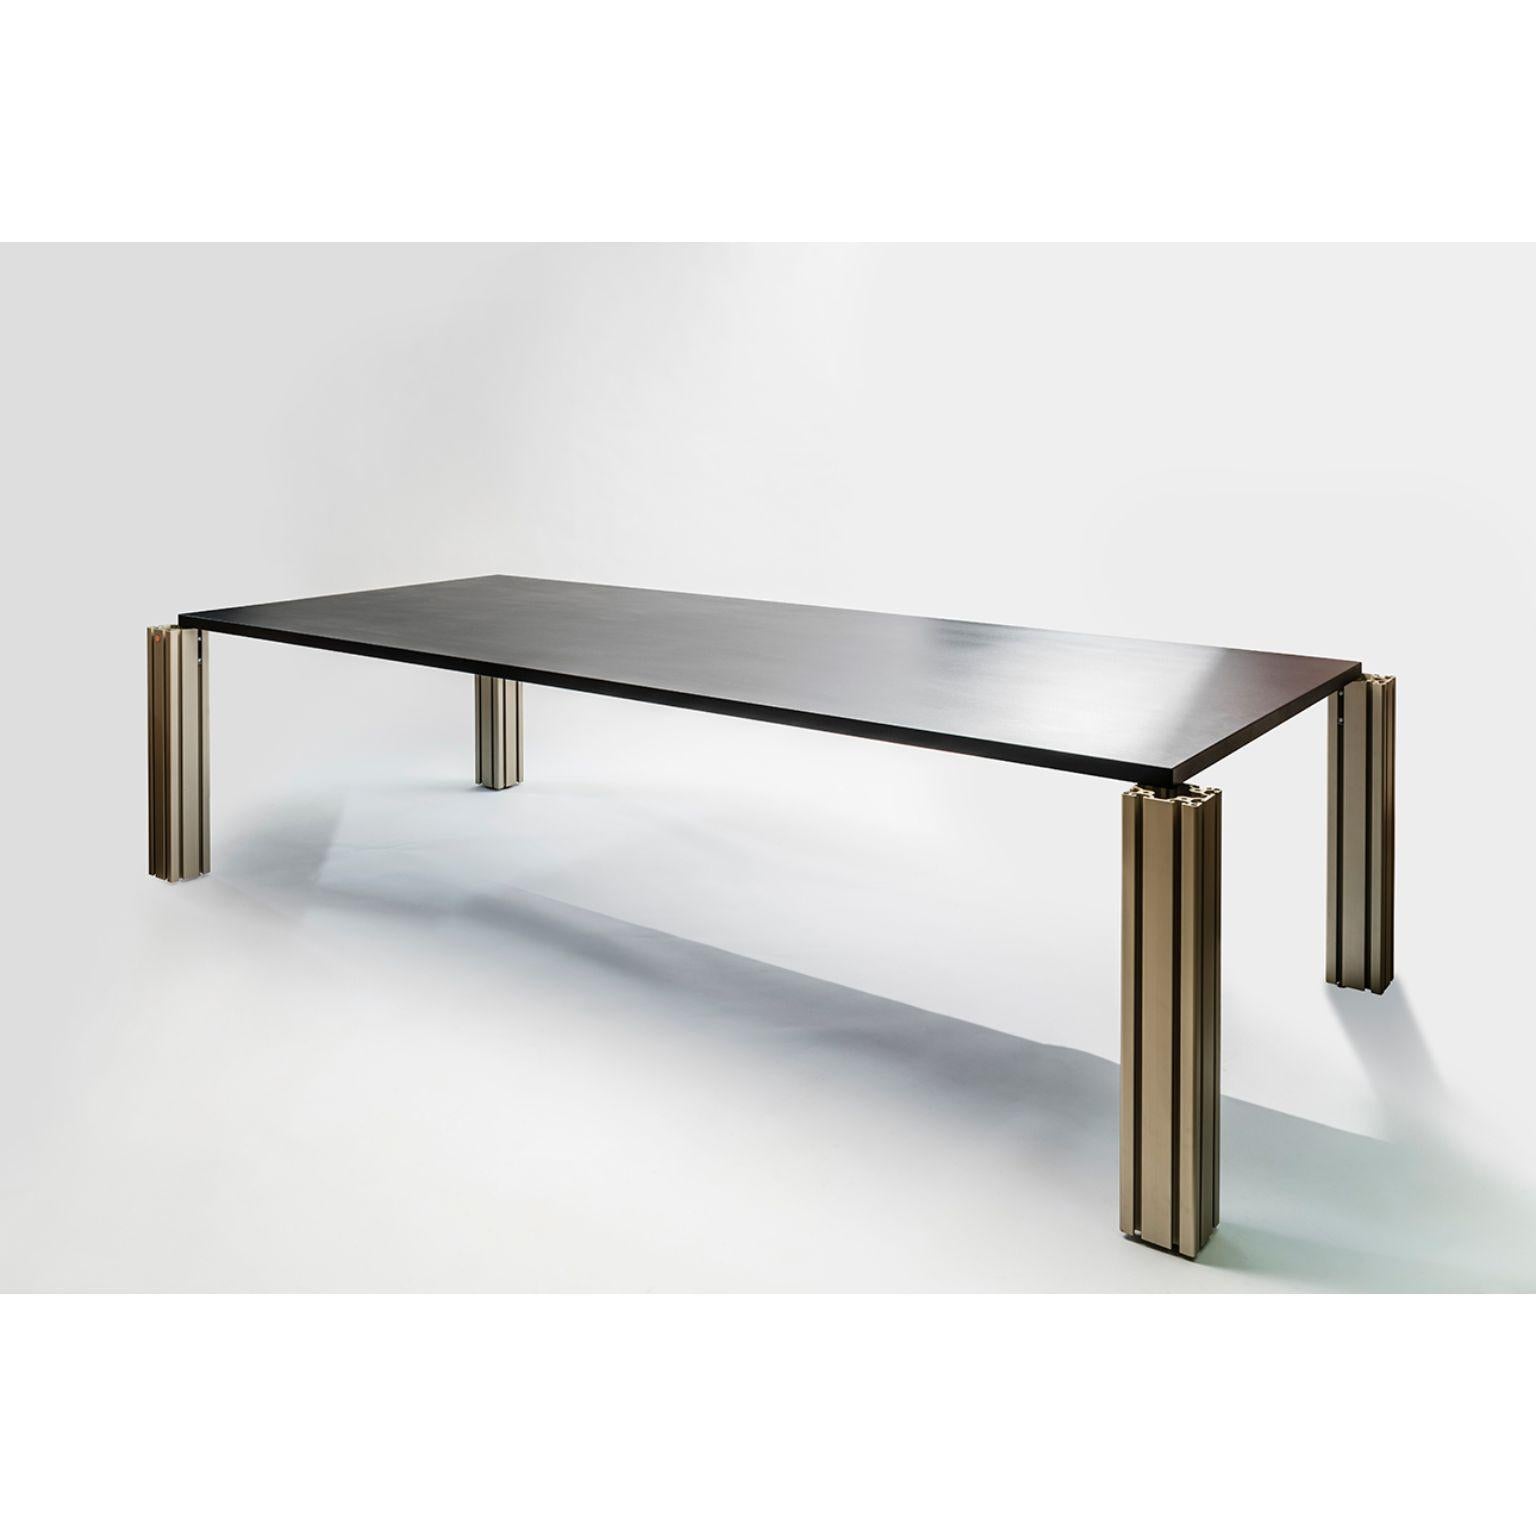 Work extruded table by Ben Gorham.
Materials: Top: Antracite/Nero Ferro/Nero Rt 9822/ Peltro metal and Concrete
 Structure: Champagne extruded anodized aluminium
Dimensions: W 292 x D 132 x H 72.2 cm

  

Work Extruded is a table whose design